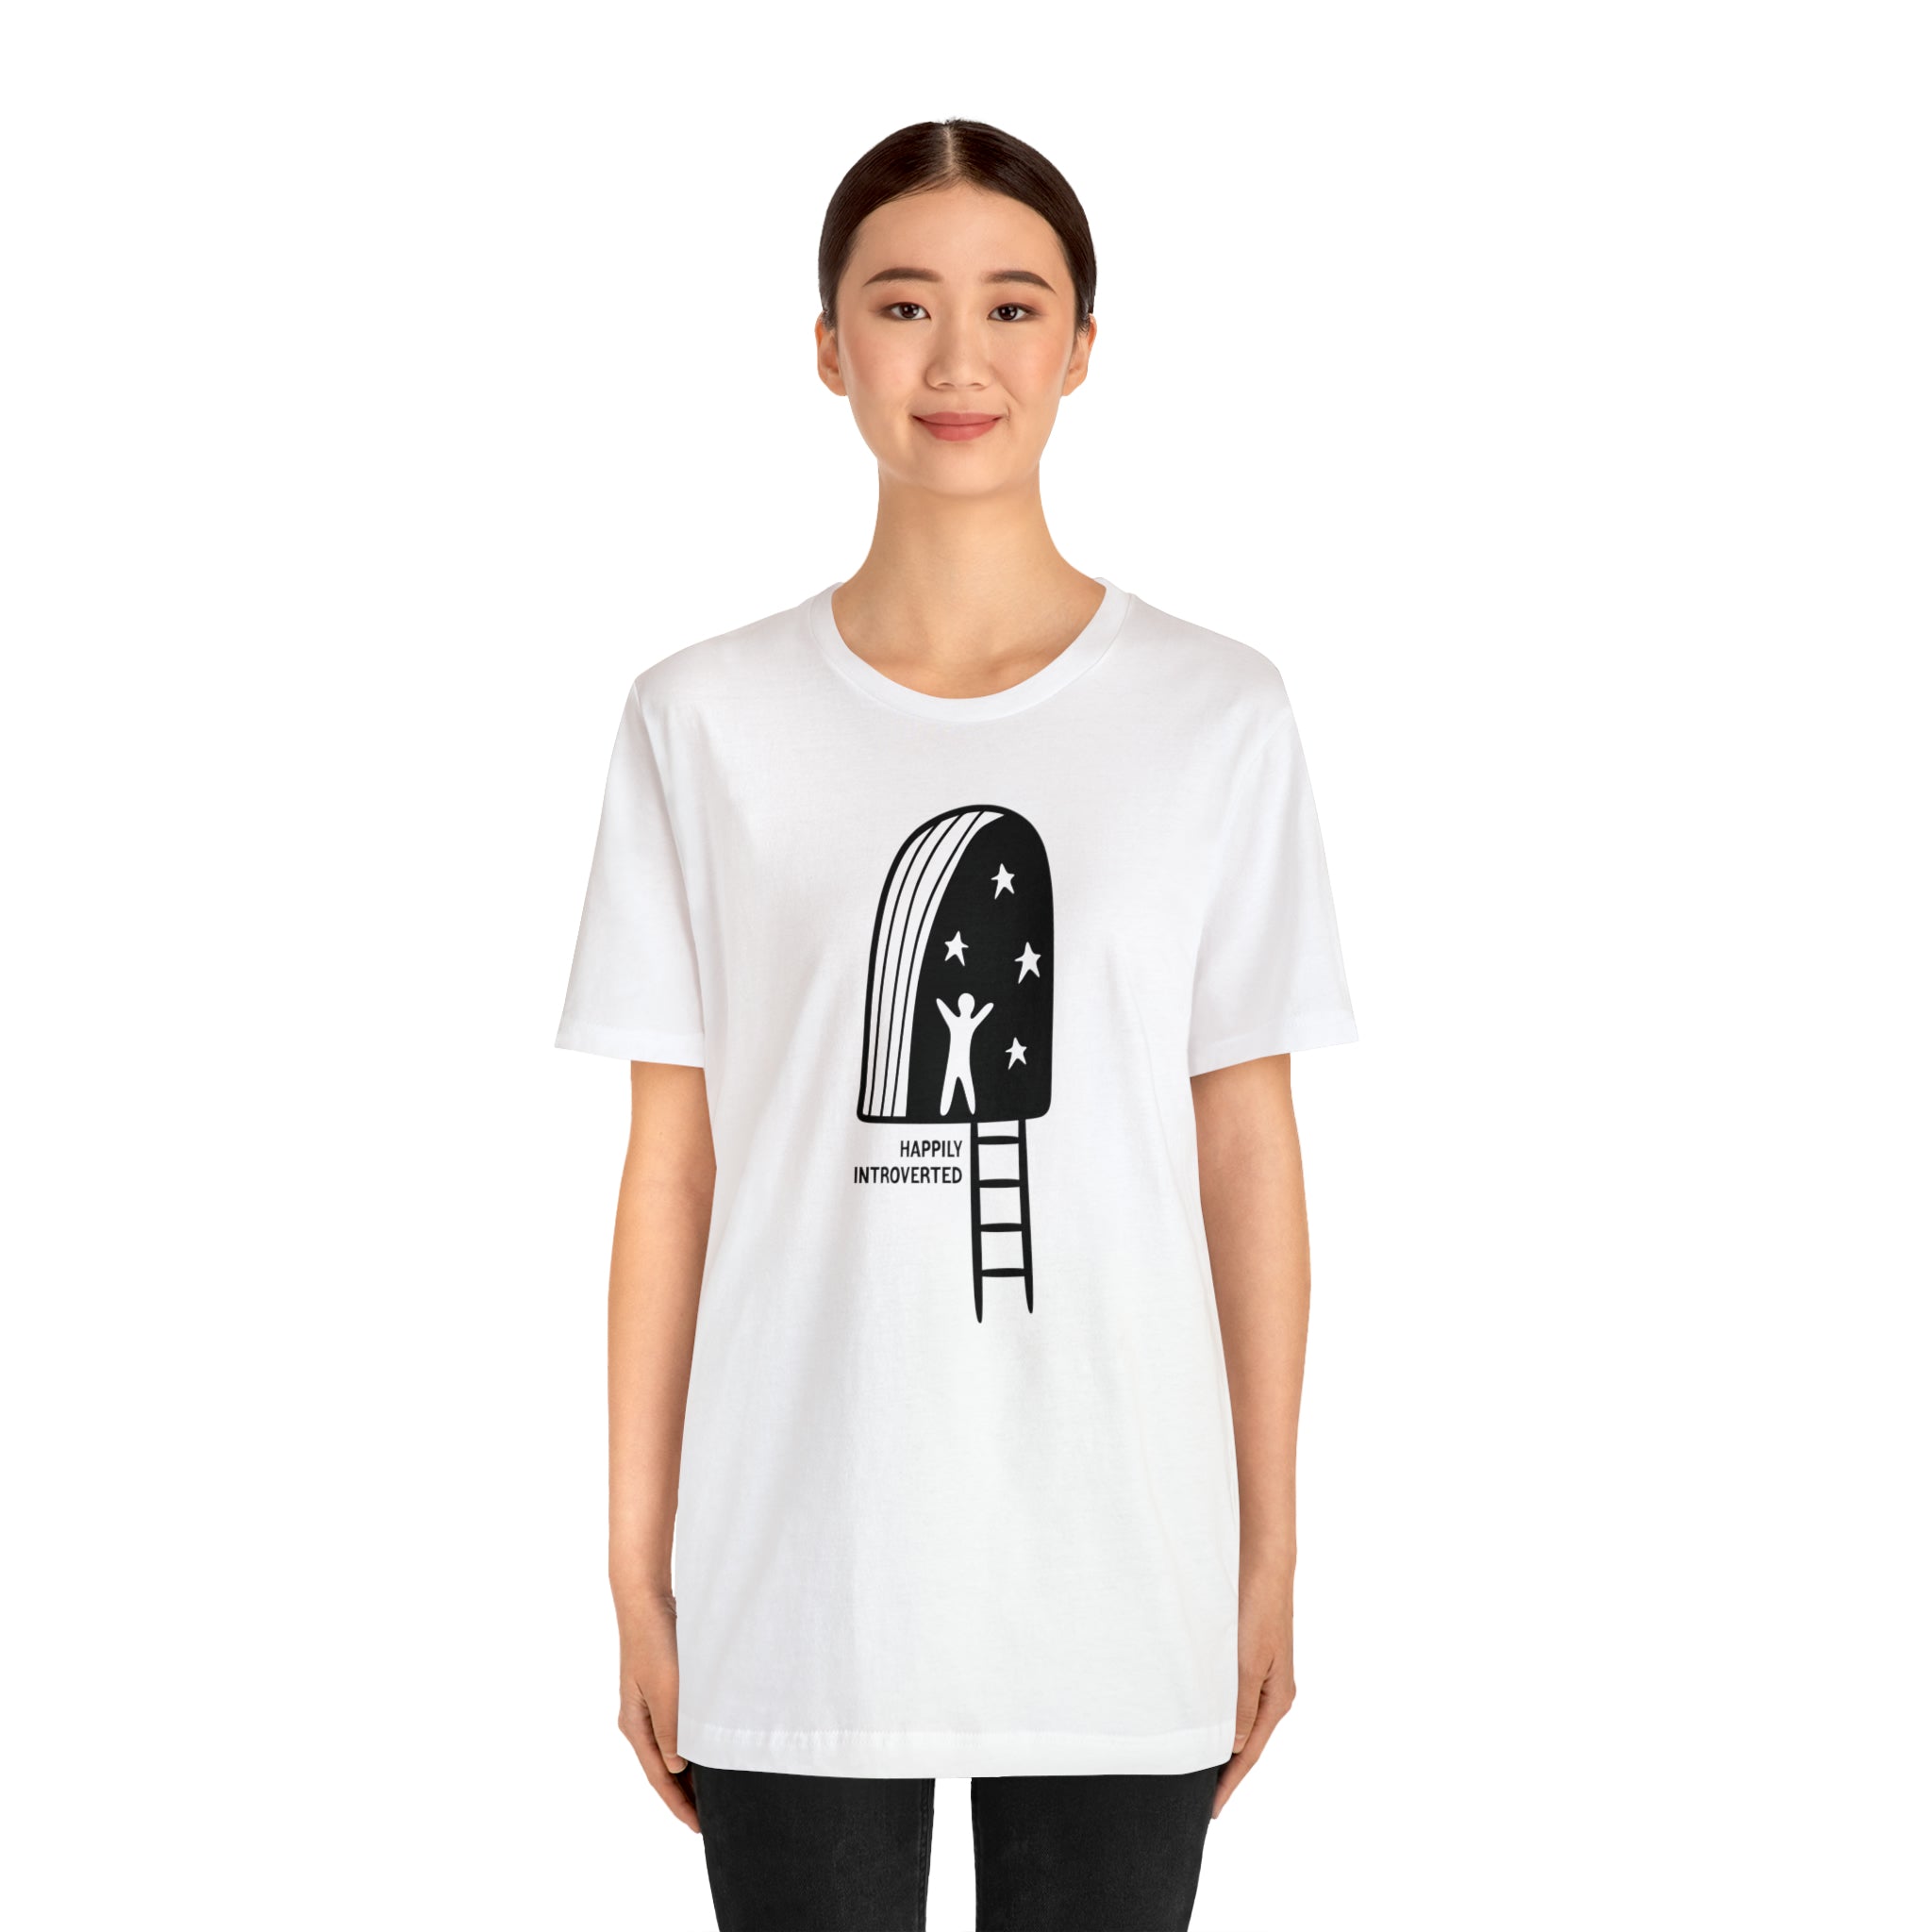 An introverted woman wearing a Happily Introverted T-Shirt with a graphic design.